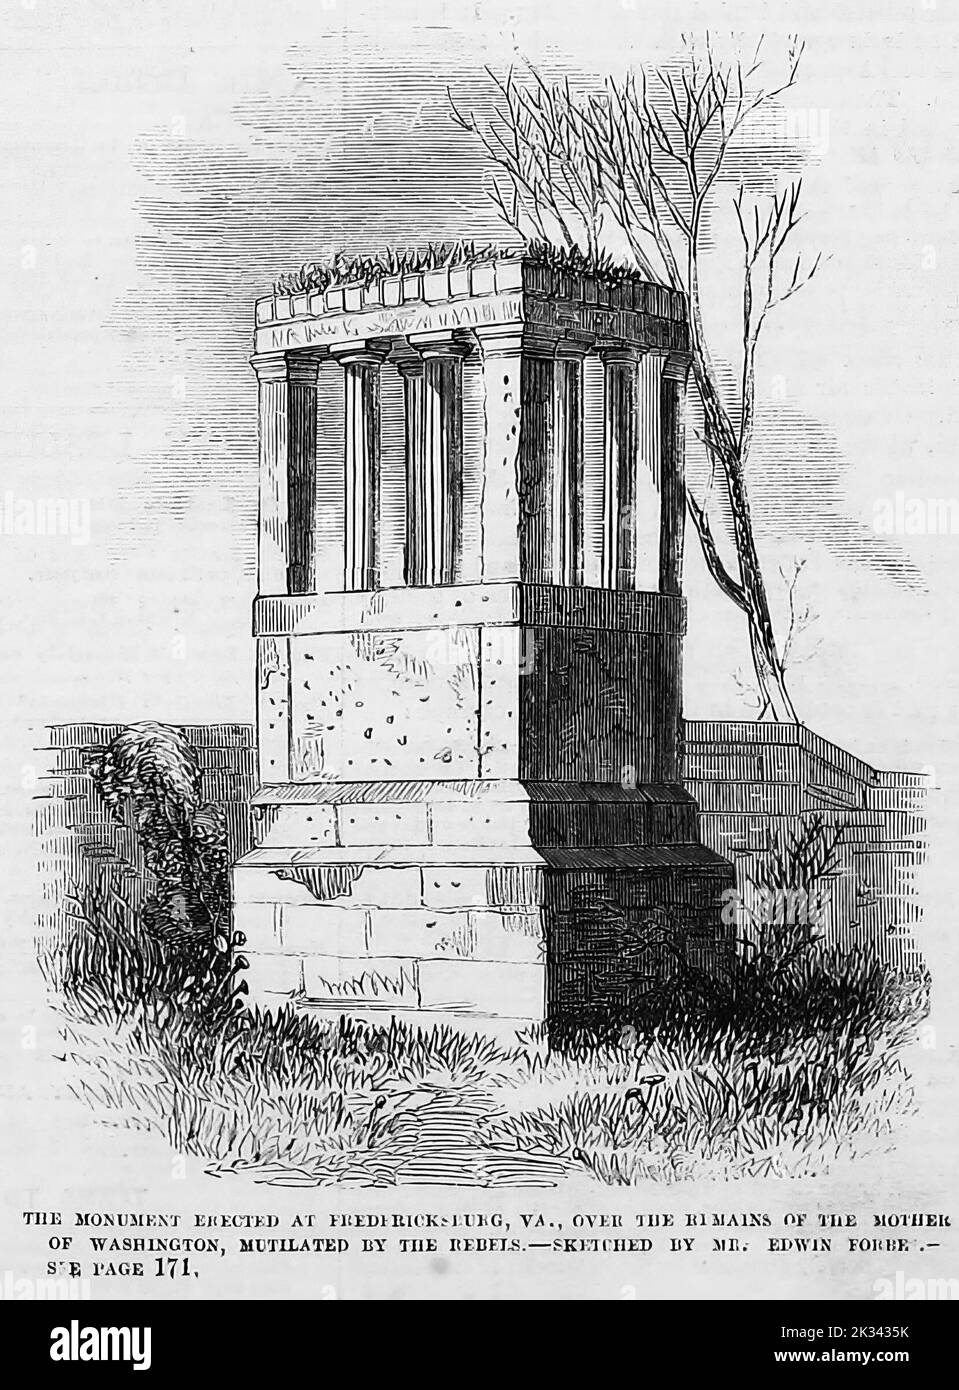 The monument erected at Fredericksburg, Virginia, over the remains of the mother of Washington, mutilated by the Rebels. June 1862. 19th century American Civil War illustration from Frank Leslie's Illustrated Newspaper Stock Photo